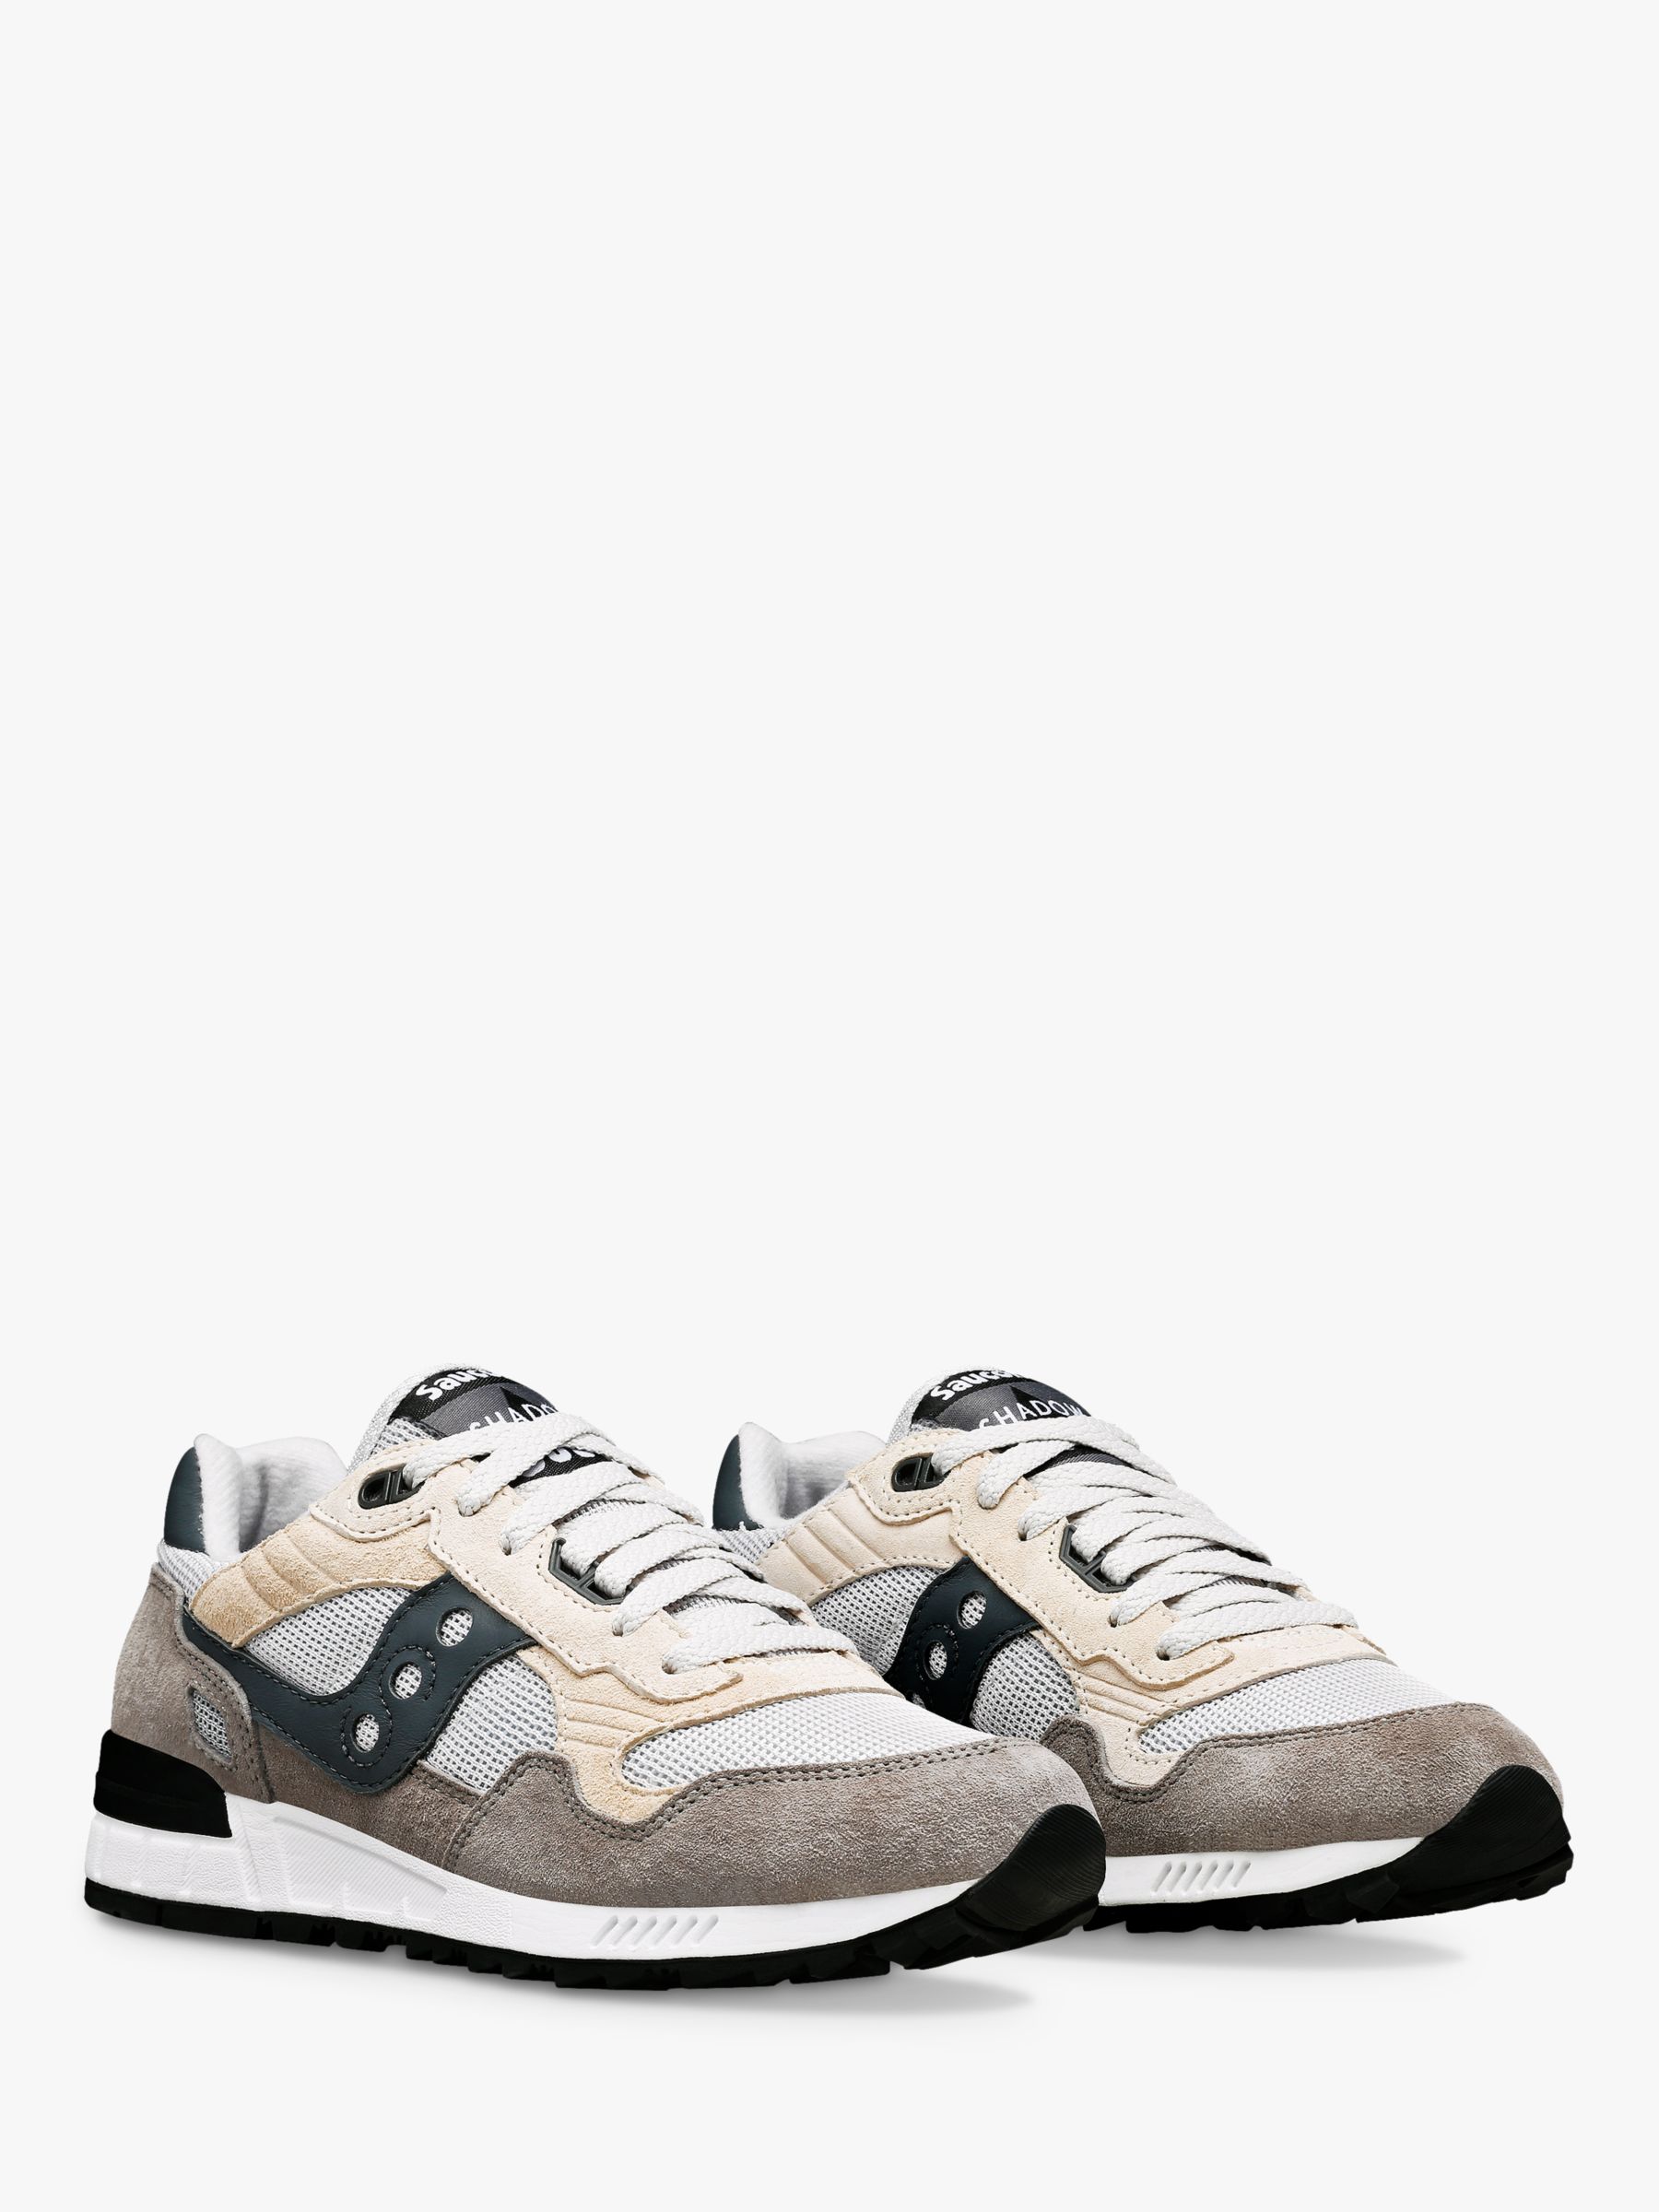 Buy Saucony 5000 Trainers, Grey/Multi Online at johnlewis.com